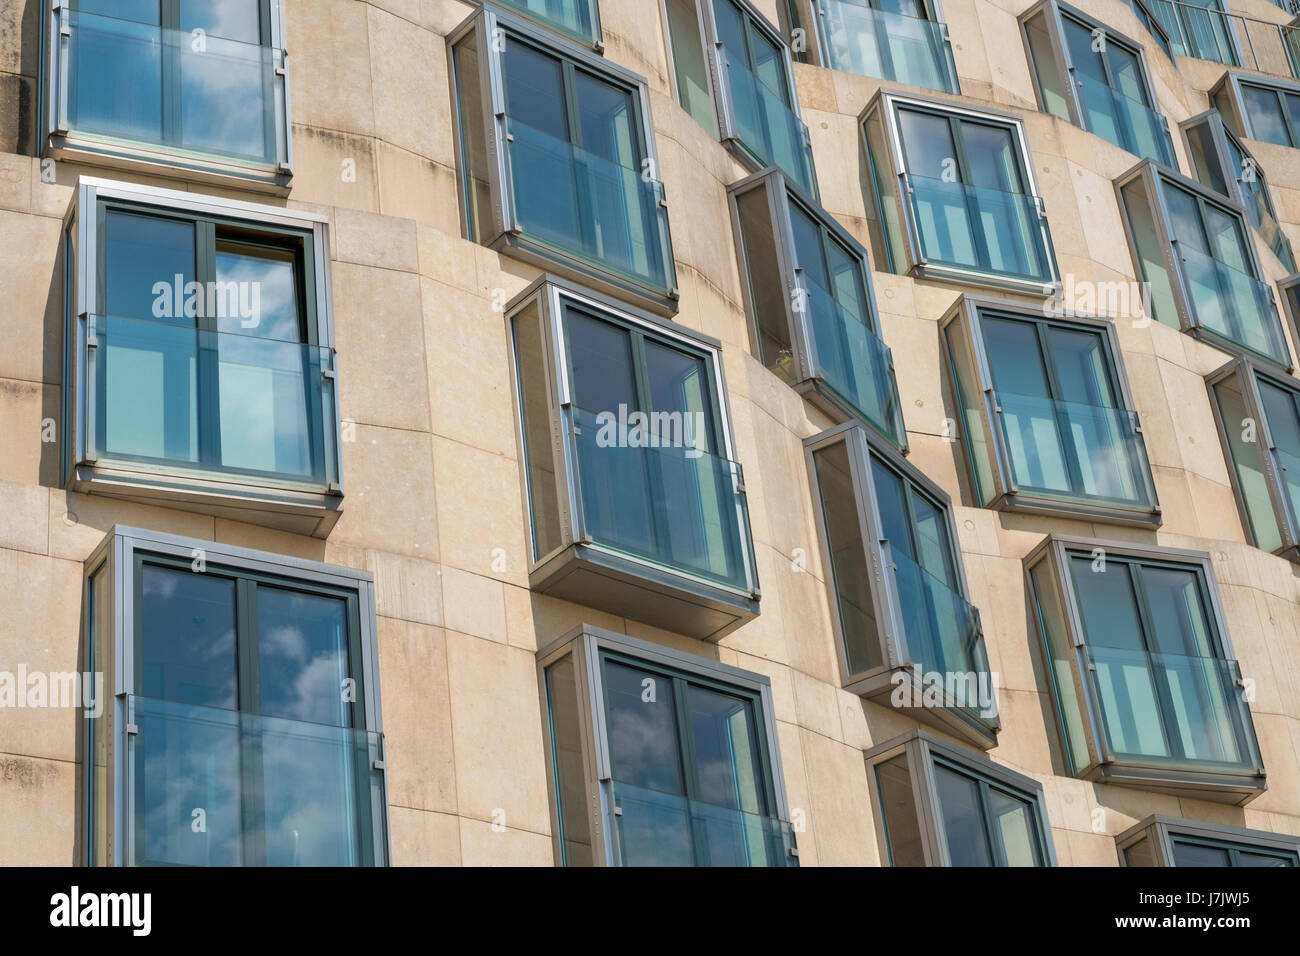 Berlin, Germany - may 23, 2017: The facade of the DZ Bank building located at Pariser Platz 3 in Berlin. It is an office, conference, and residential  Stock Photo